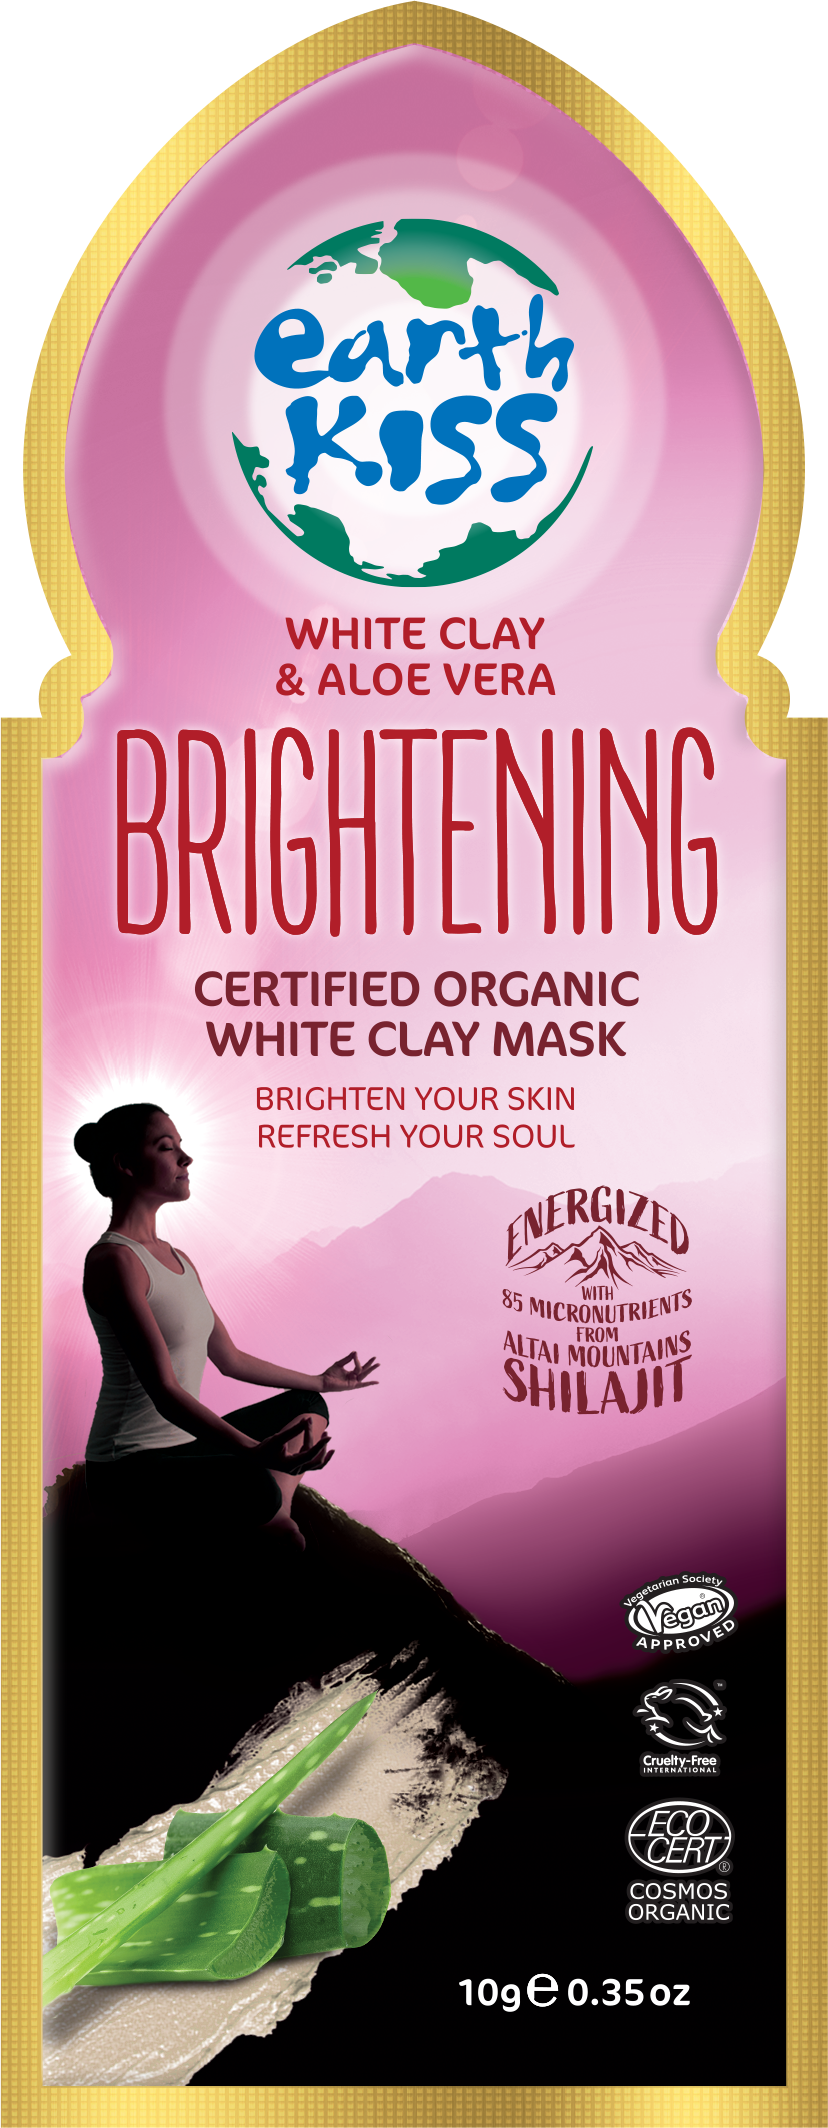 Earth Kiss Inspirations Brightening Organic White Clay Mask with Shilajit, White Clay and Aloe Vera to Brighten Your Skin, 10g